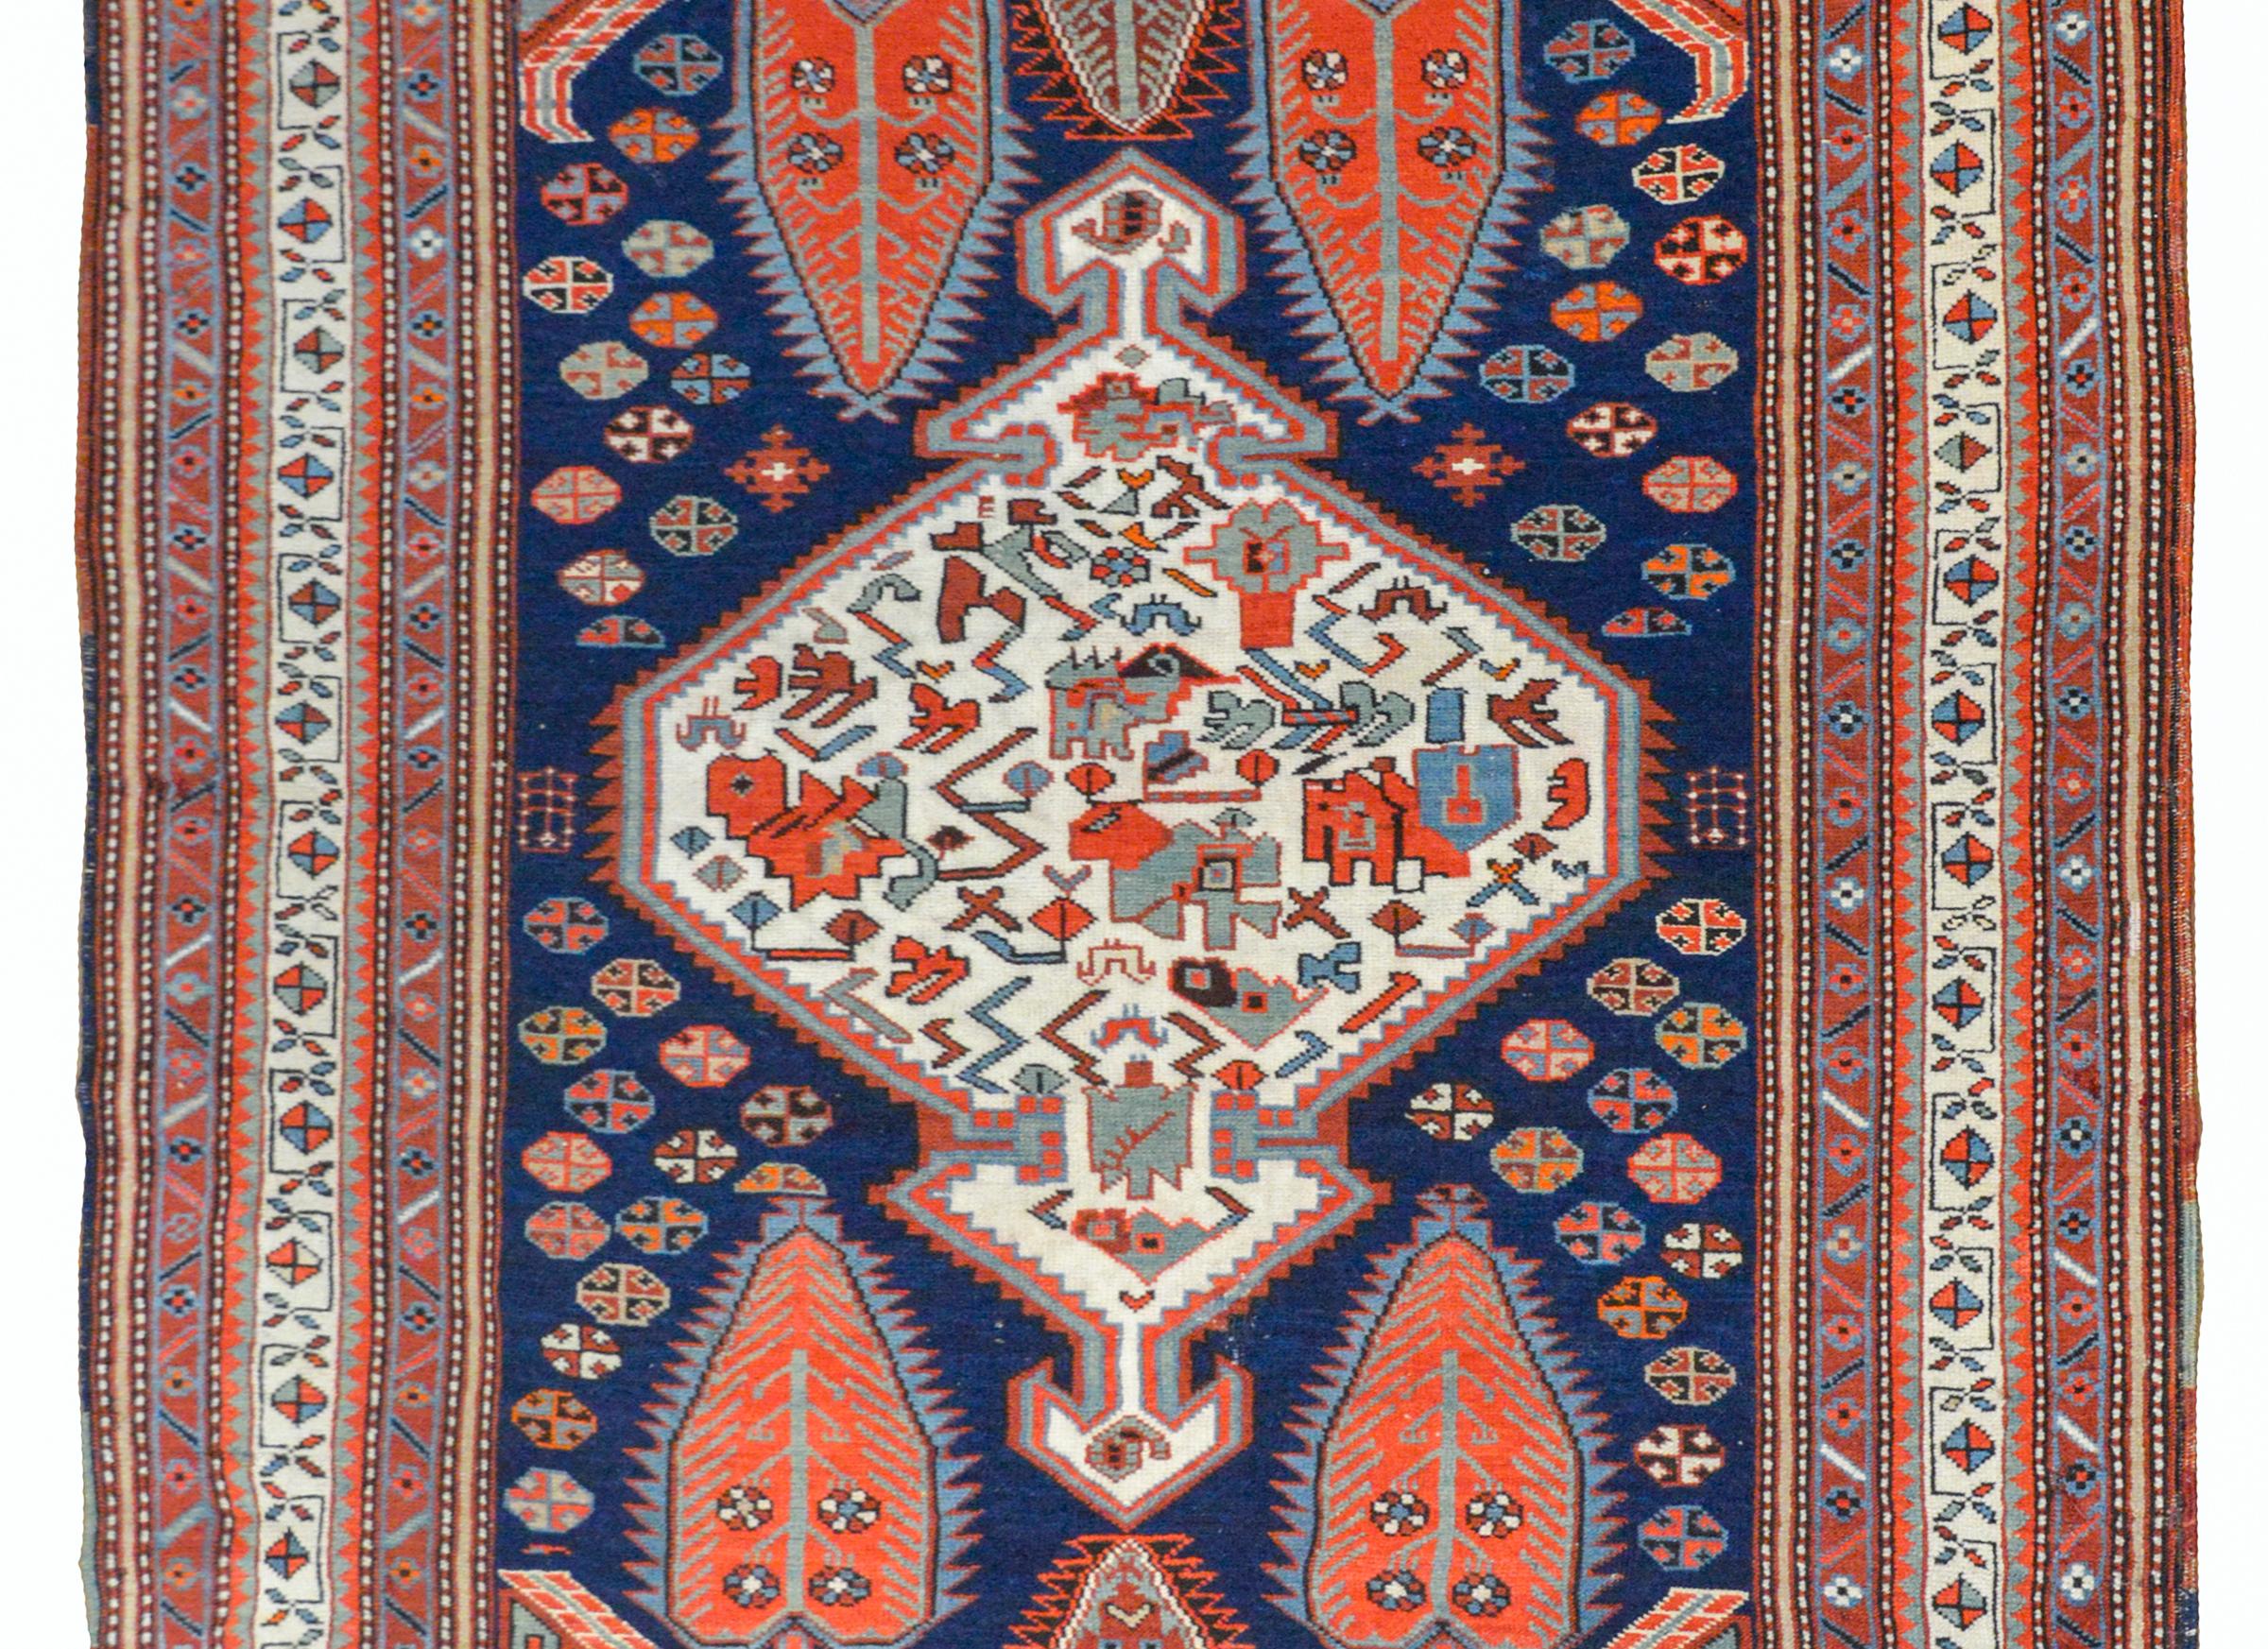 A fantastic early 20th century Shkli rug from the Karabagh area in the Caucasus with a bold tribal pattern with a large white diamond medallion with stylized flowers and vines woven in crimson, green, indigo, and white all set against an indigo